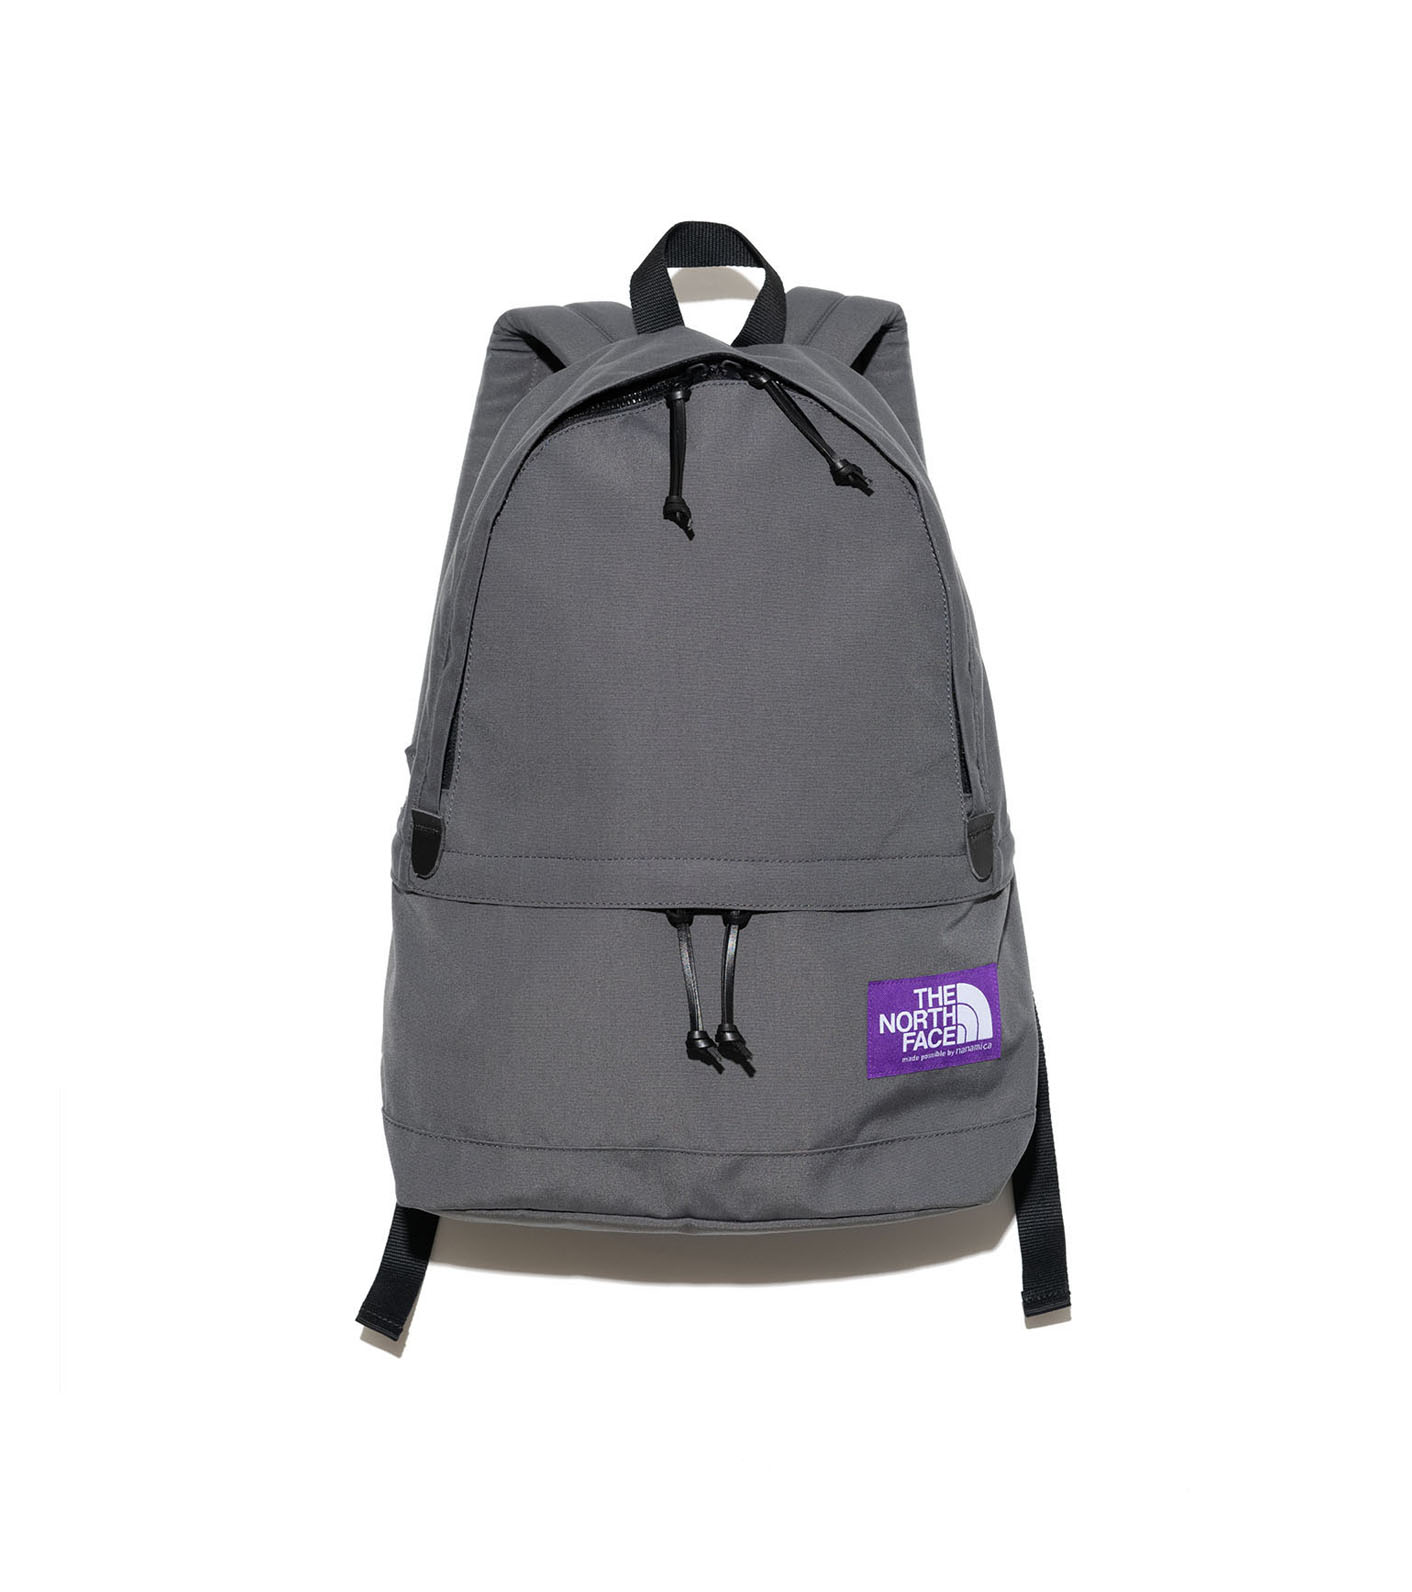 THE NORTH FACE PURPLE LABEL DAY PACK